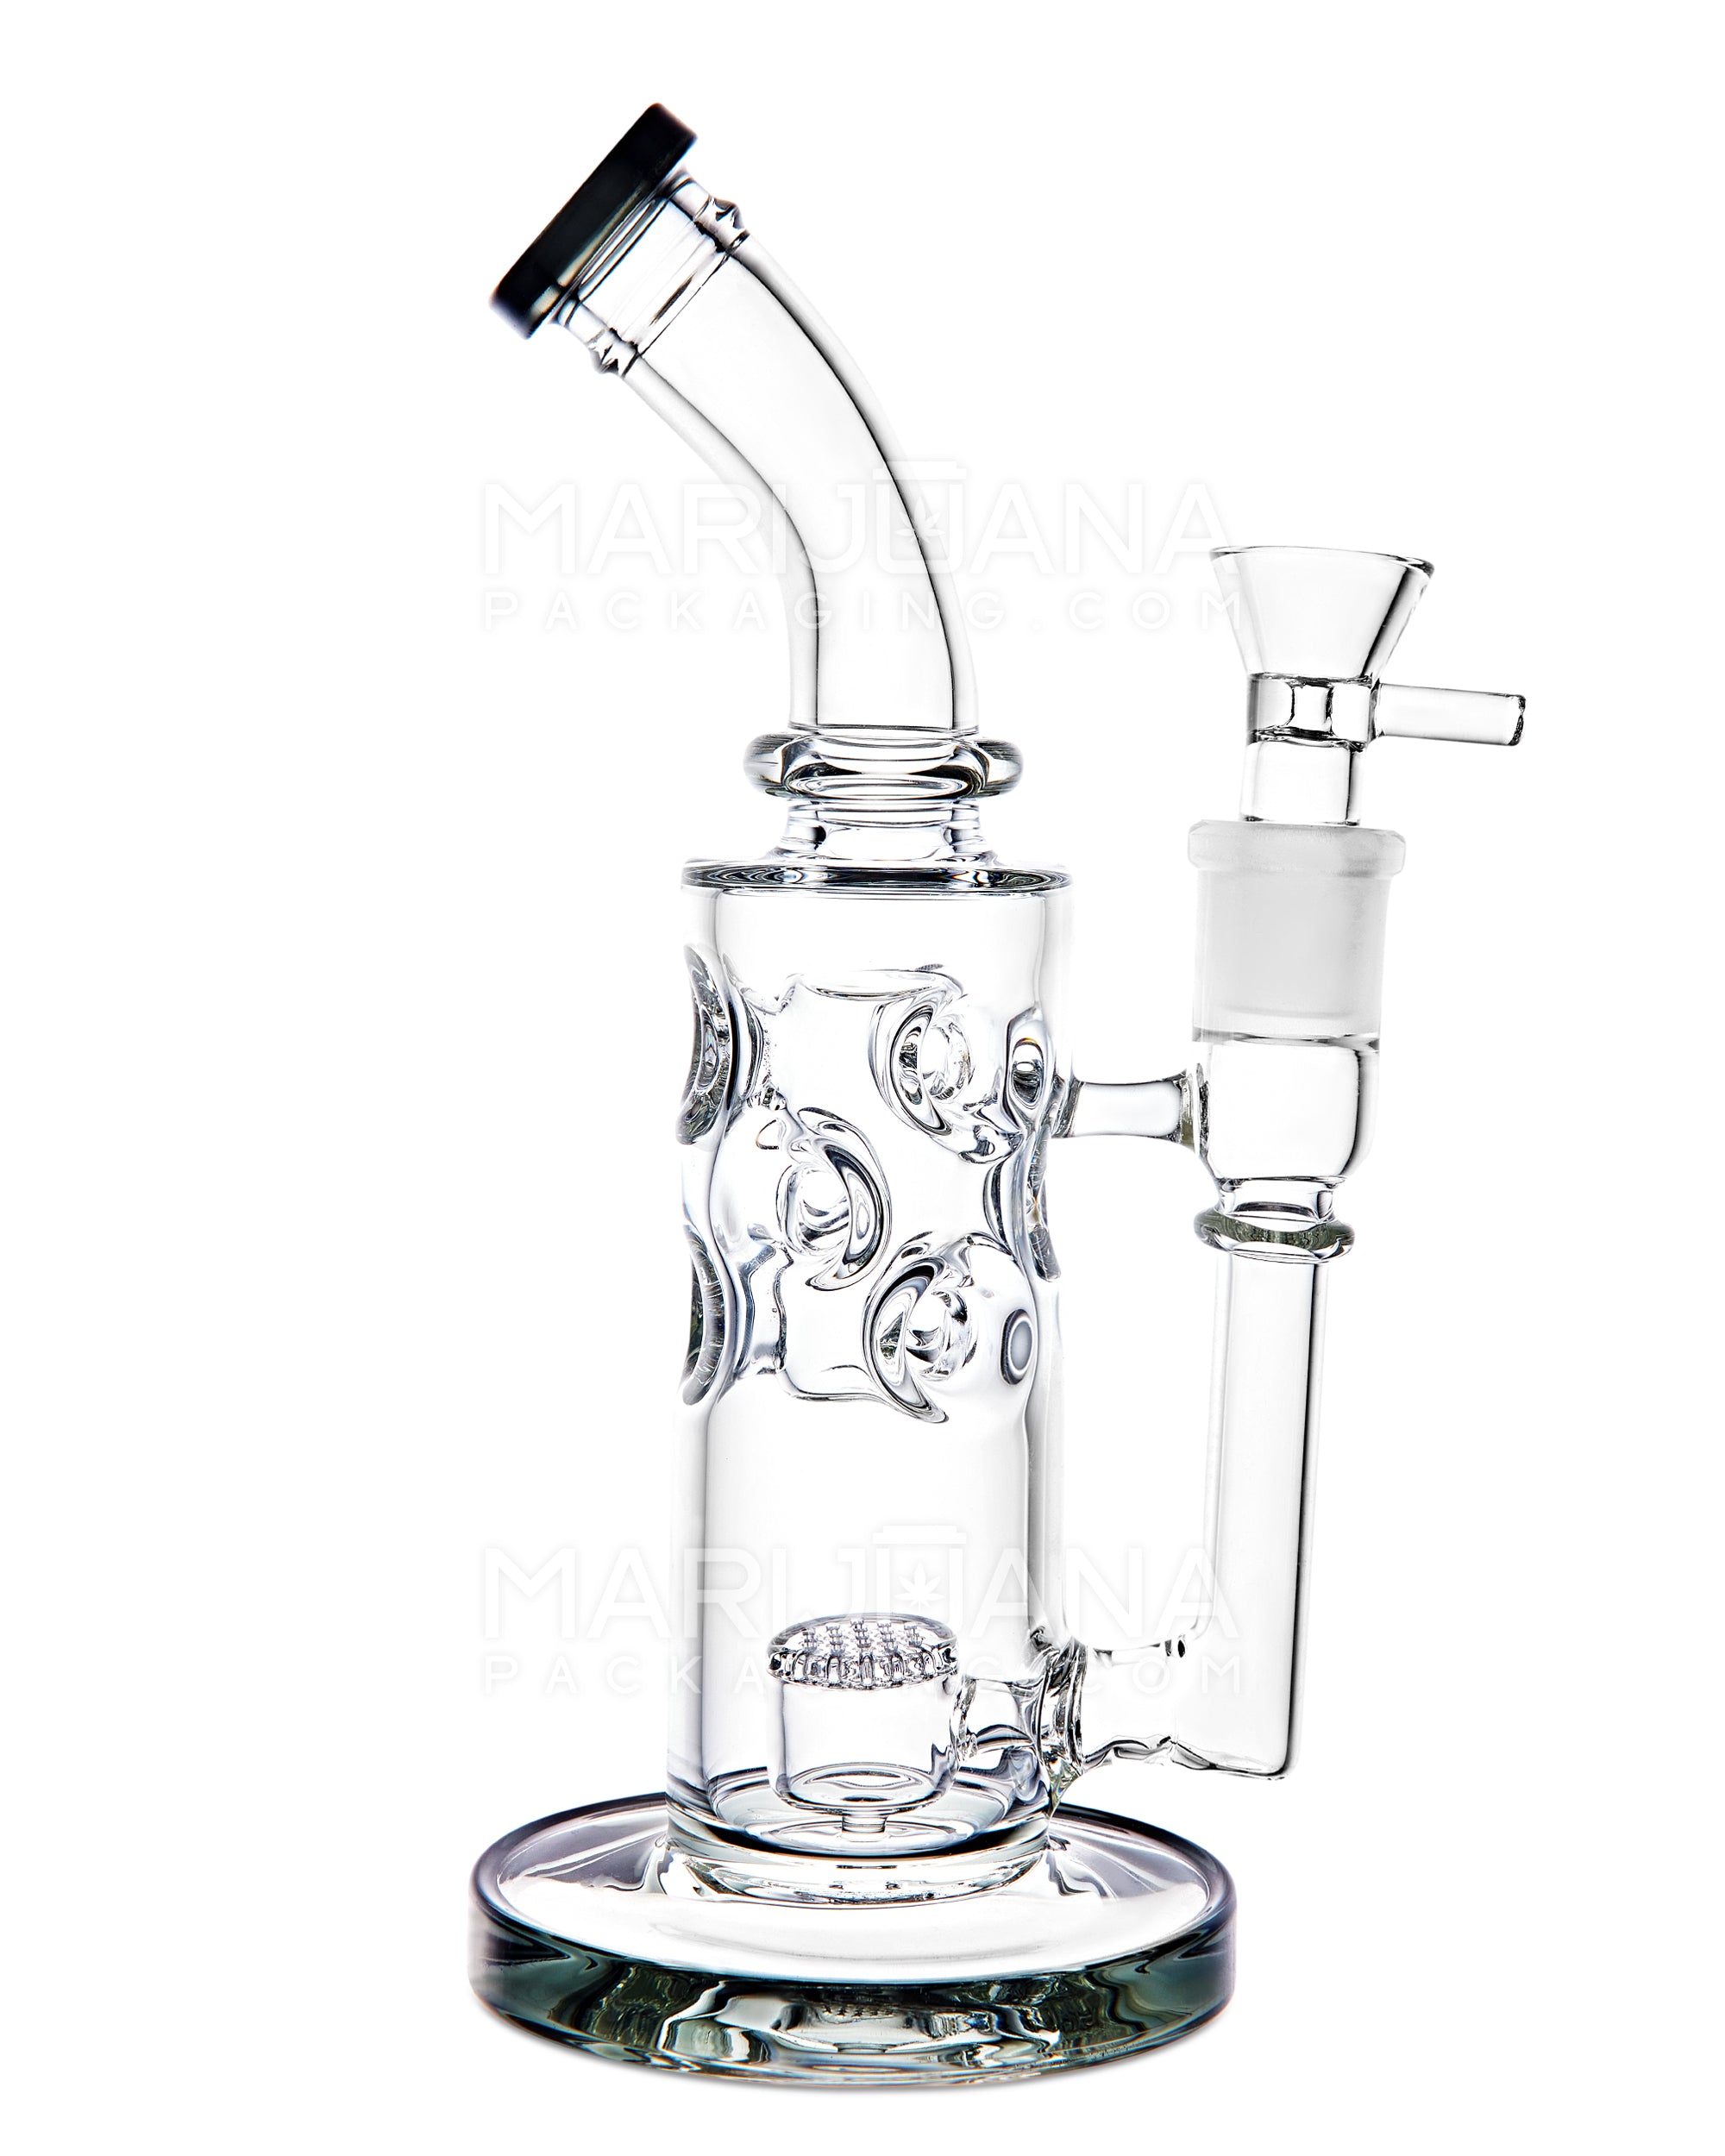 Bent Neck Honeycomb Perc Thick Glass Water Pipe w/ Ice Catcher | 10in Tall - 18mm Bowl - Smoke - 1